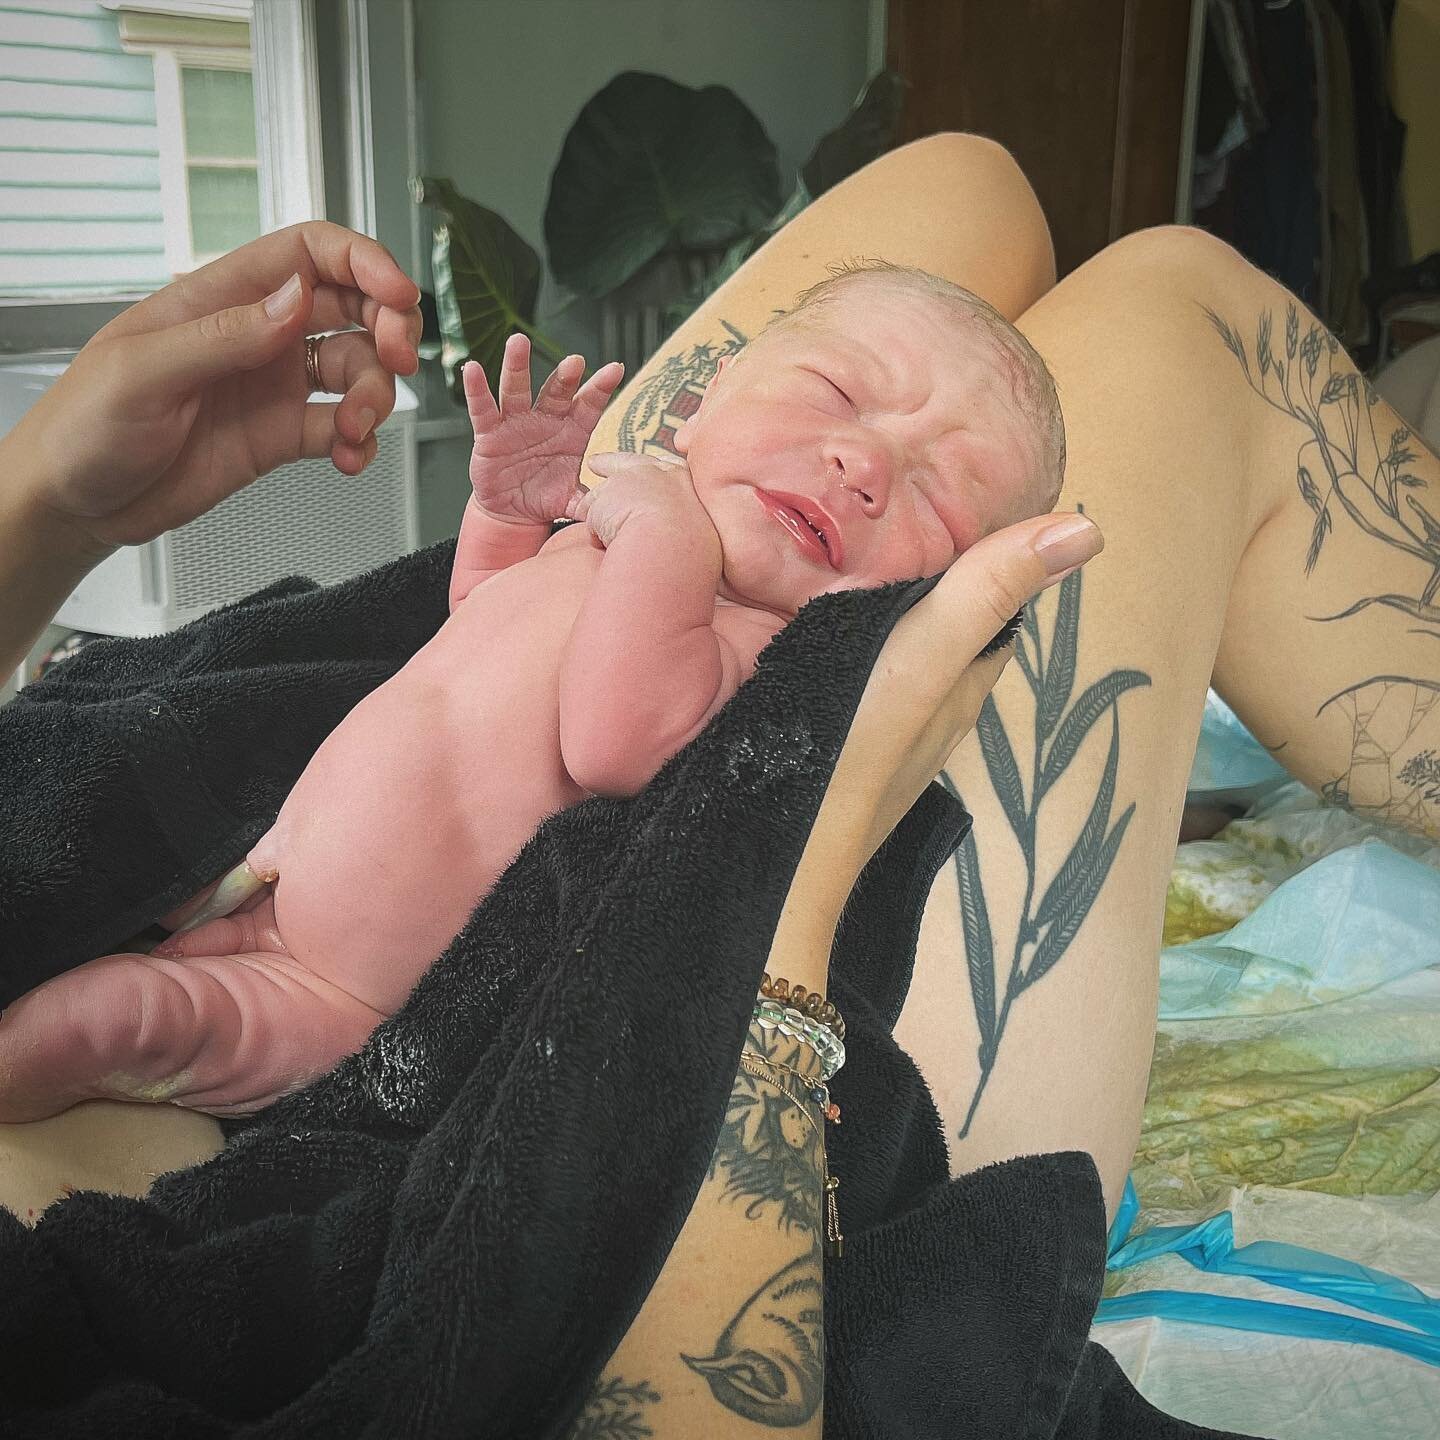 My minutes old newborn&rsquo;s photo for a random rant I was already considering posting (and was inspired to post after the latest @midwiferywisdom podcast - thanks @artofbirthing!): &ldquo;women own birth&rdquo;. I just purchased an @indiebirth shi